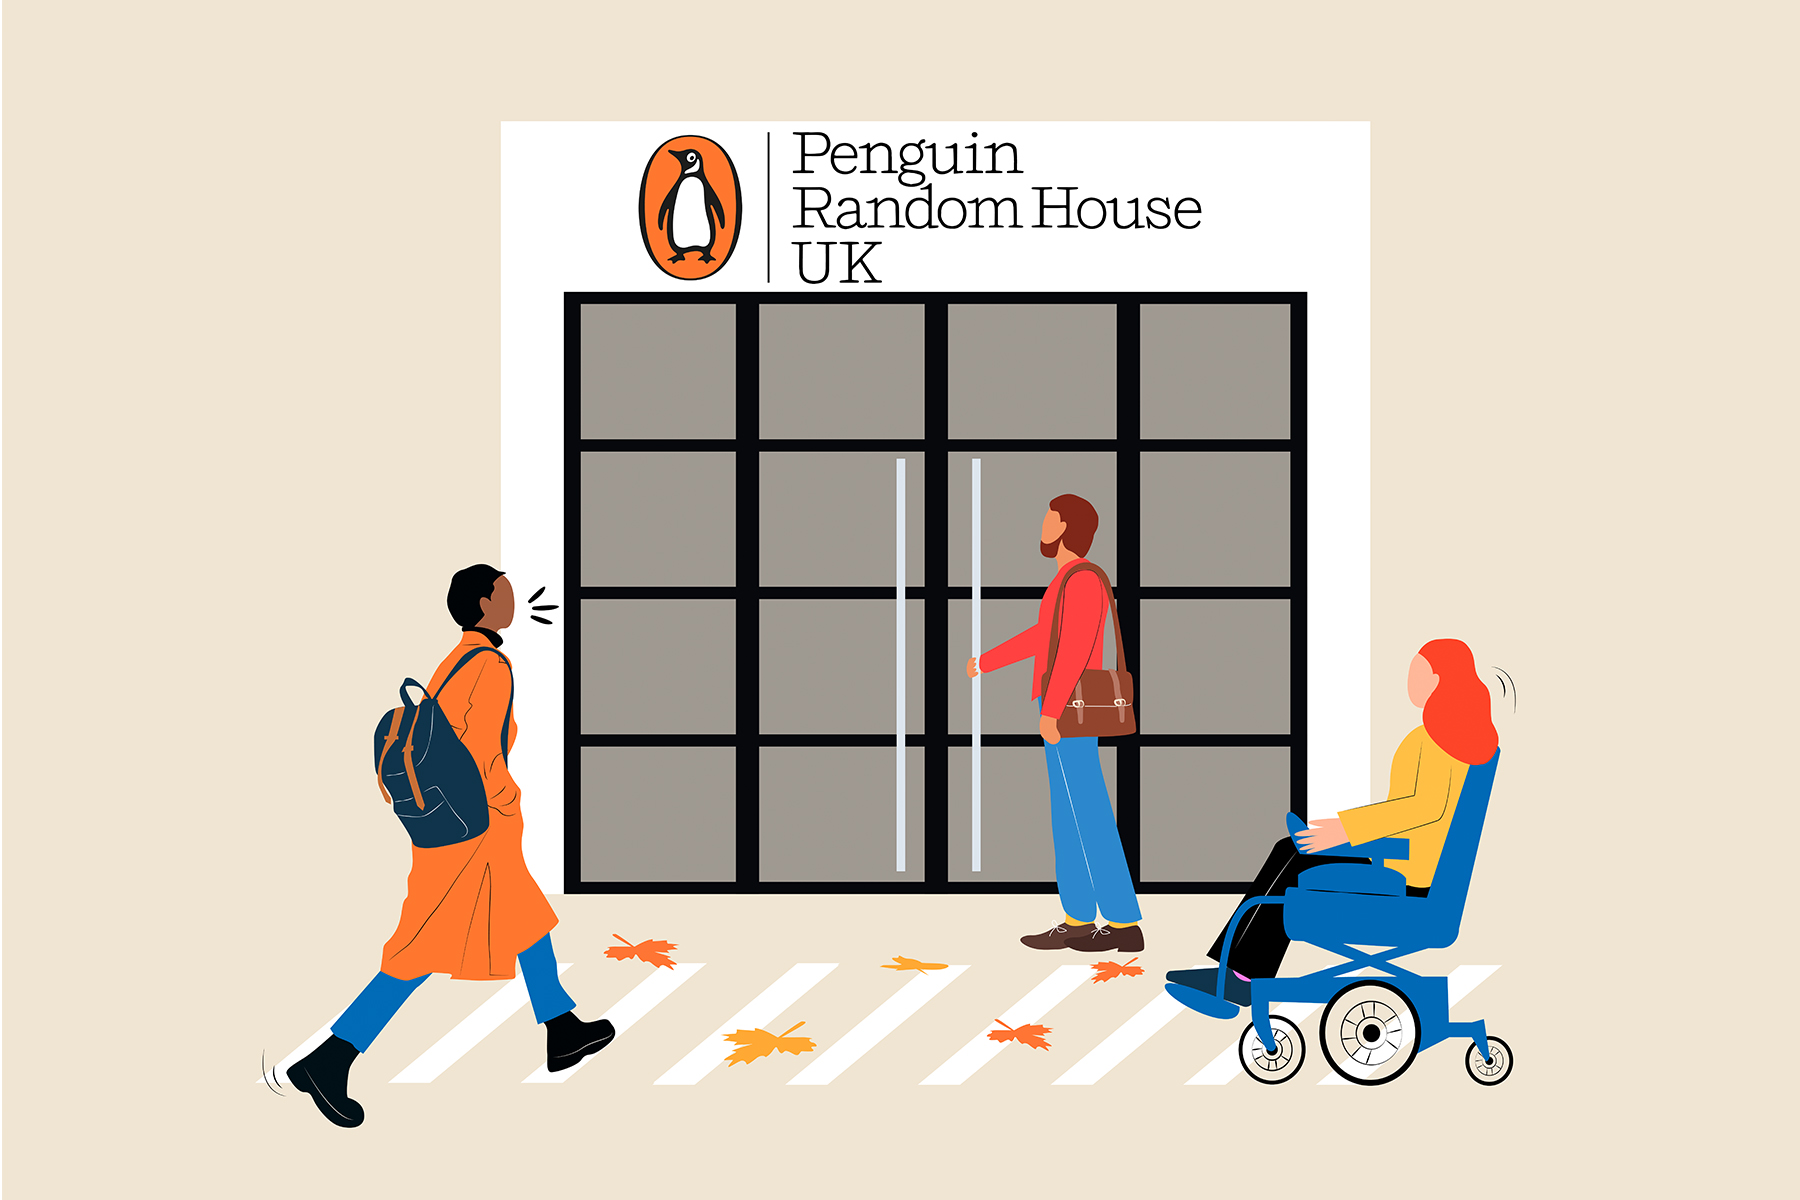 Illustration of three people entering the Penguin Random House UK office, one opening the door, one in a motorised wheelchair, and another walking.